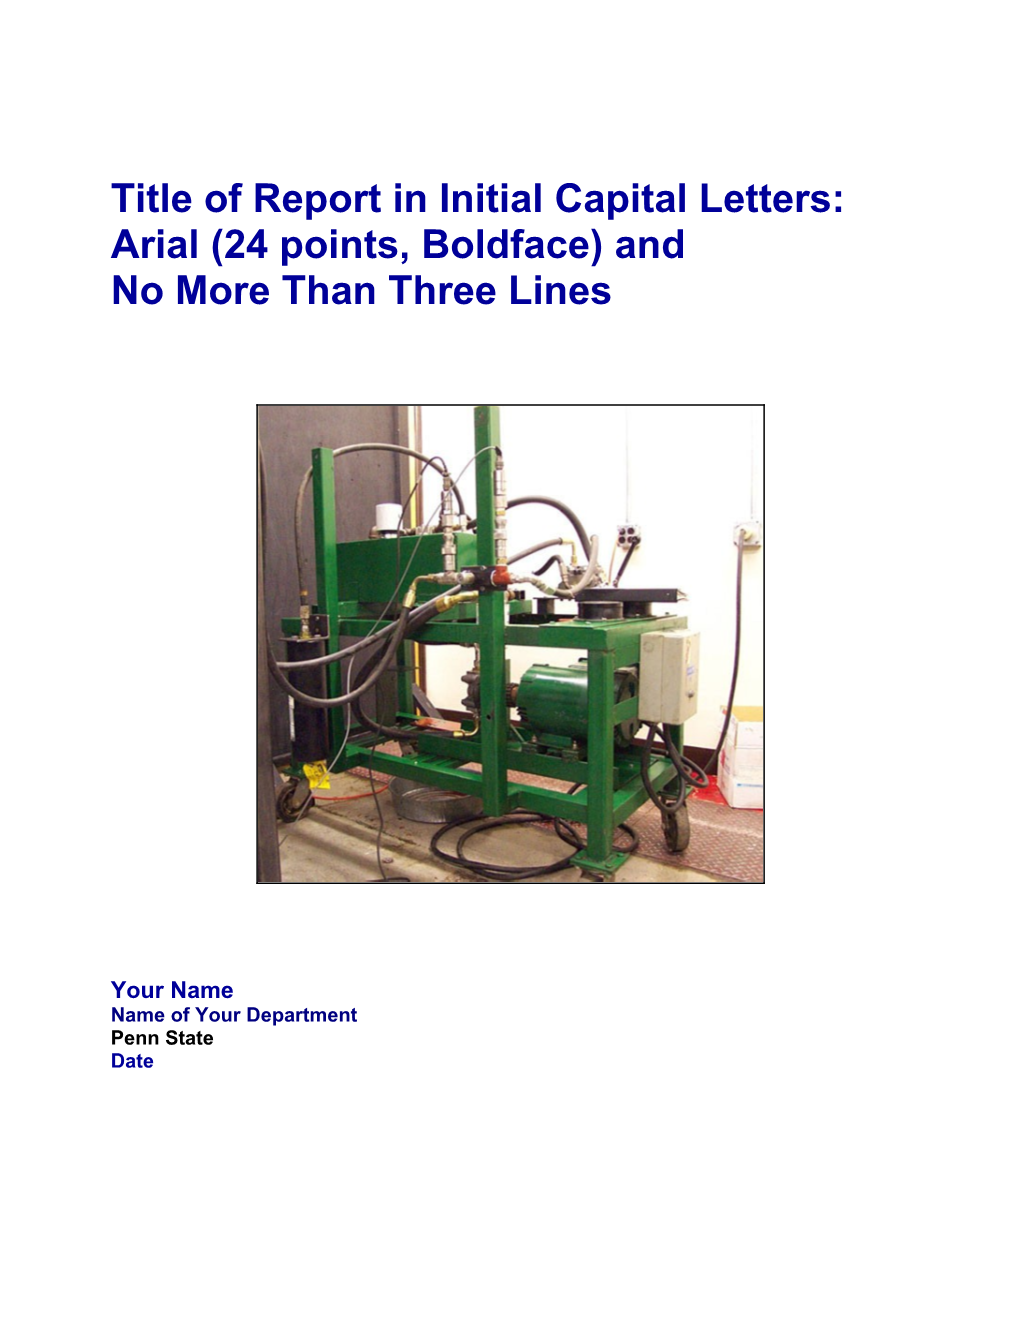 Title of Report in Initial Capital Letters s1